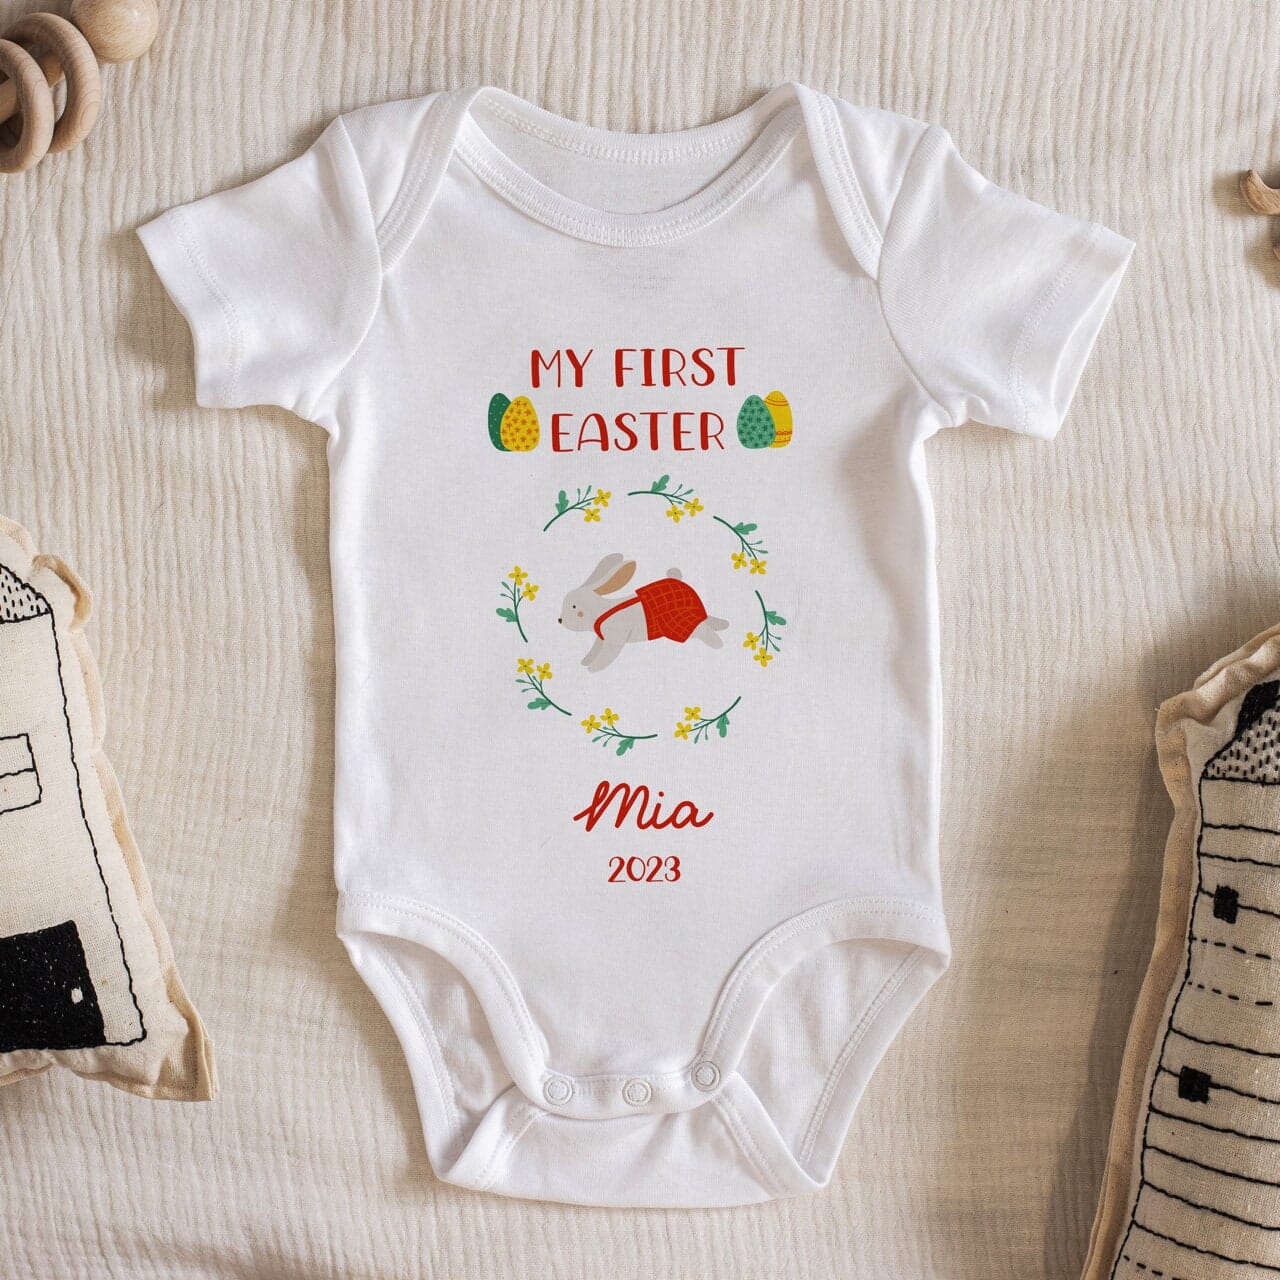 Personalised My first Easter bodysuit for boys or girls, Organic cotton, Baby Bunny Tshirt, Easter Gift